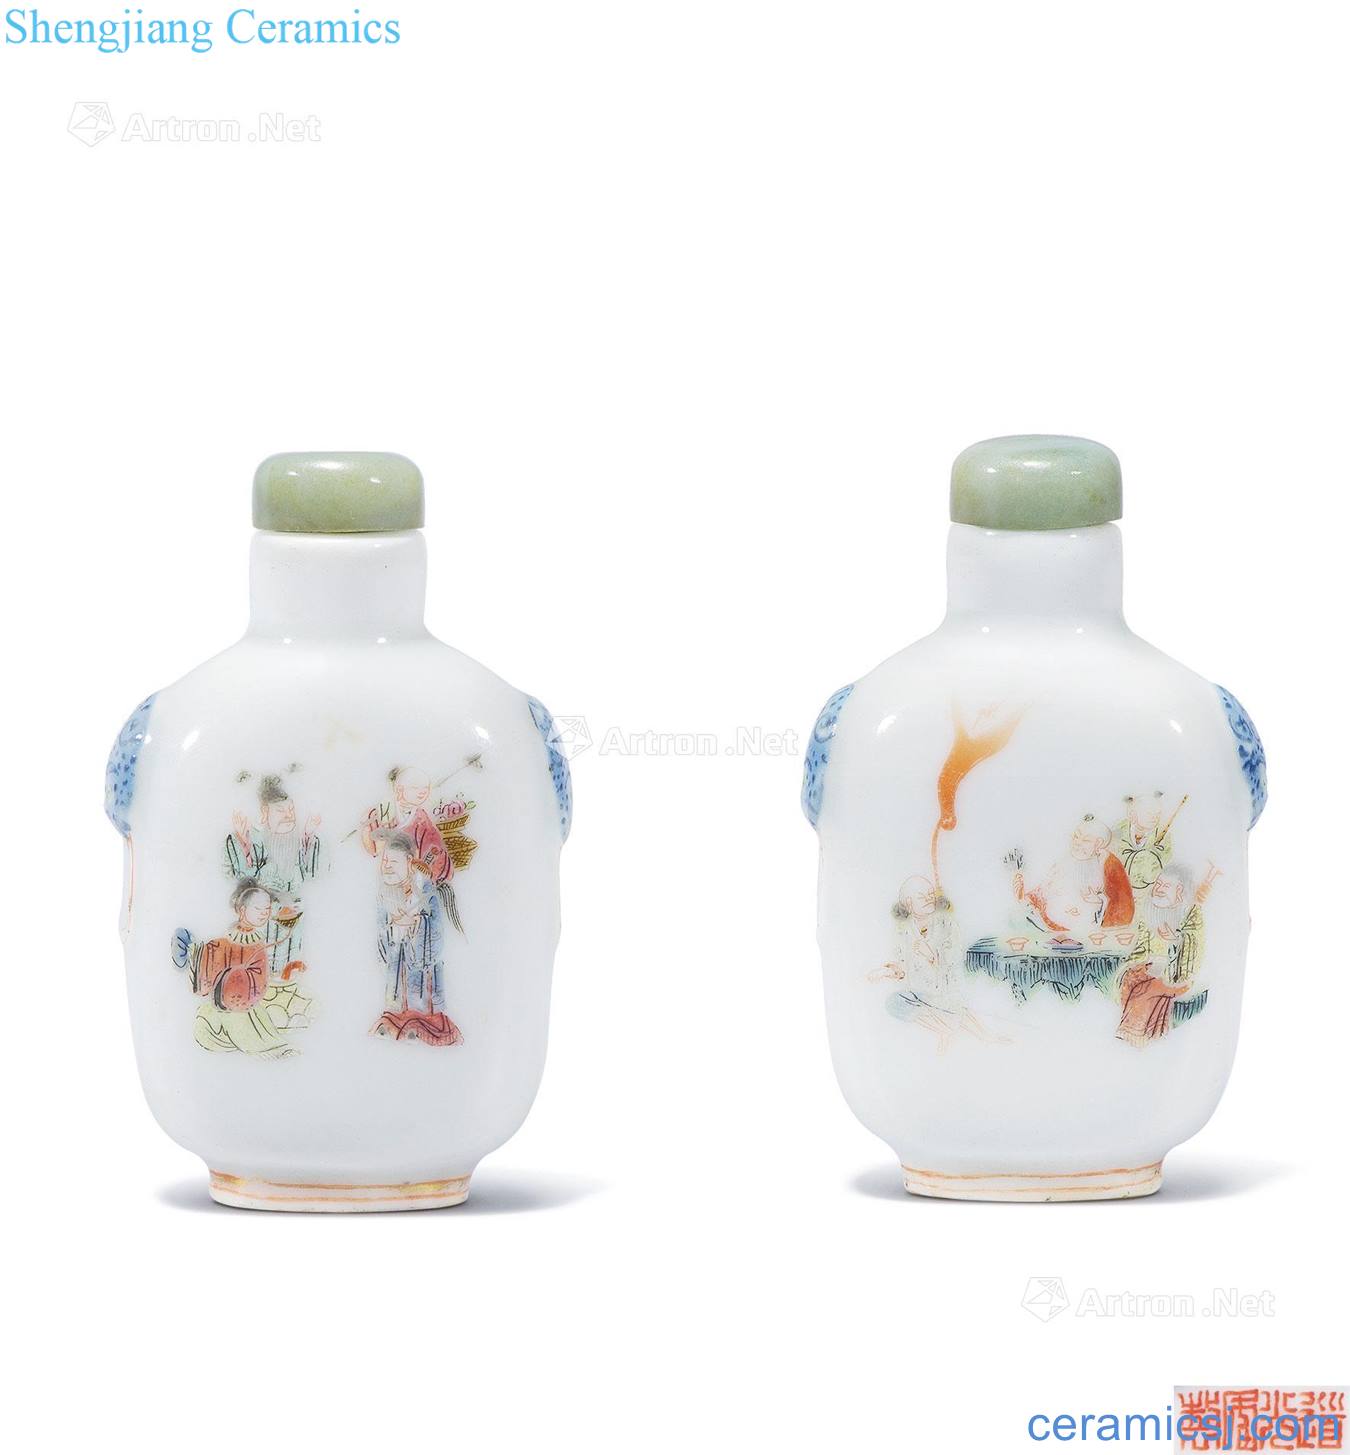 Qing daoguang Pastel the eight immortals character figure snuff bottles